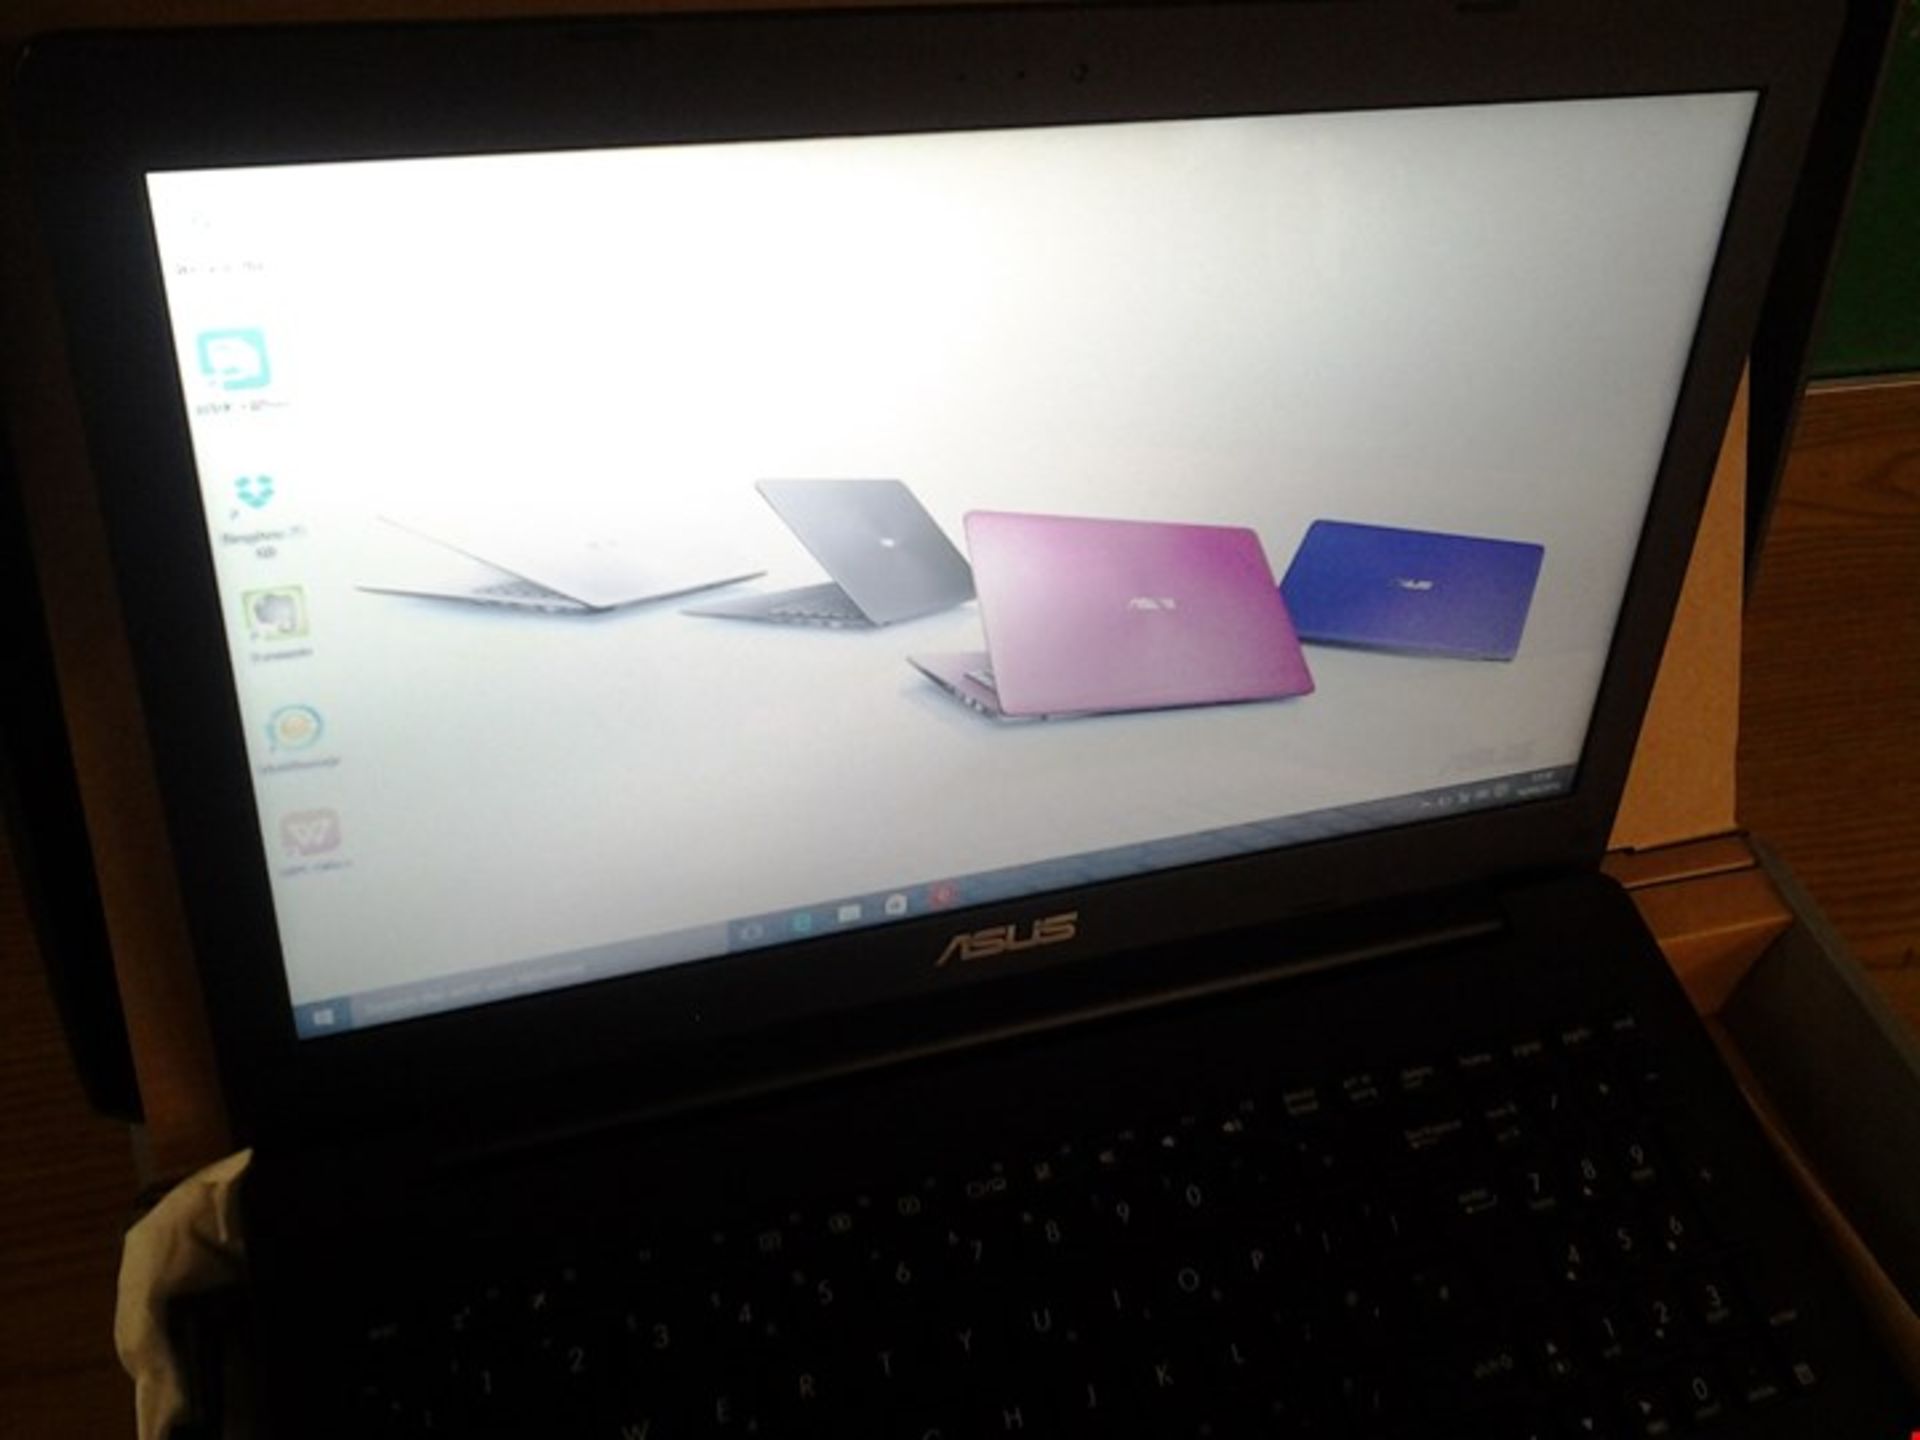 BOXED ASUS SONICMASTER LAPTOP WITH CHARGER - Image 2 of 2